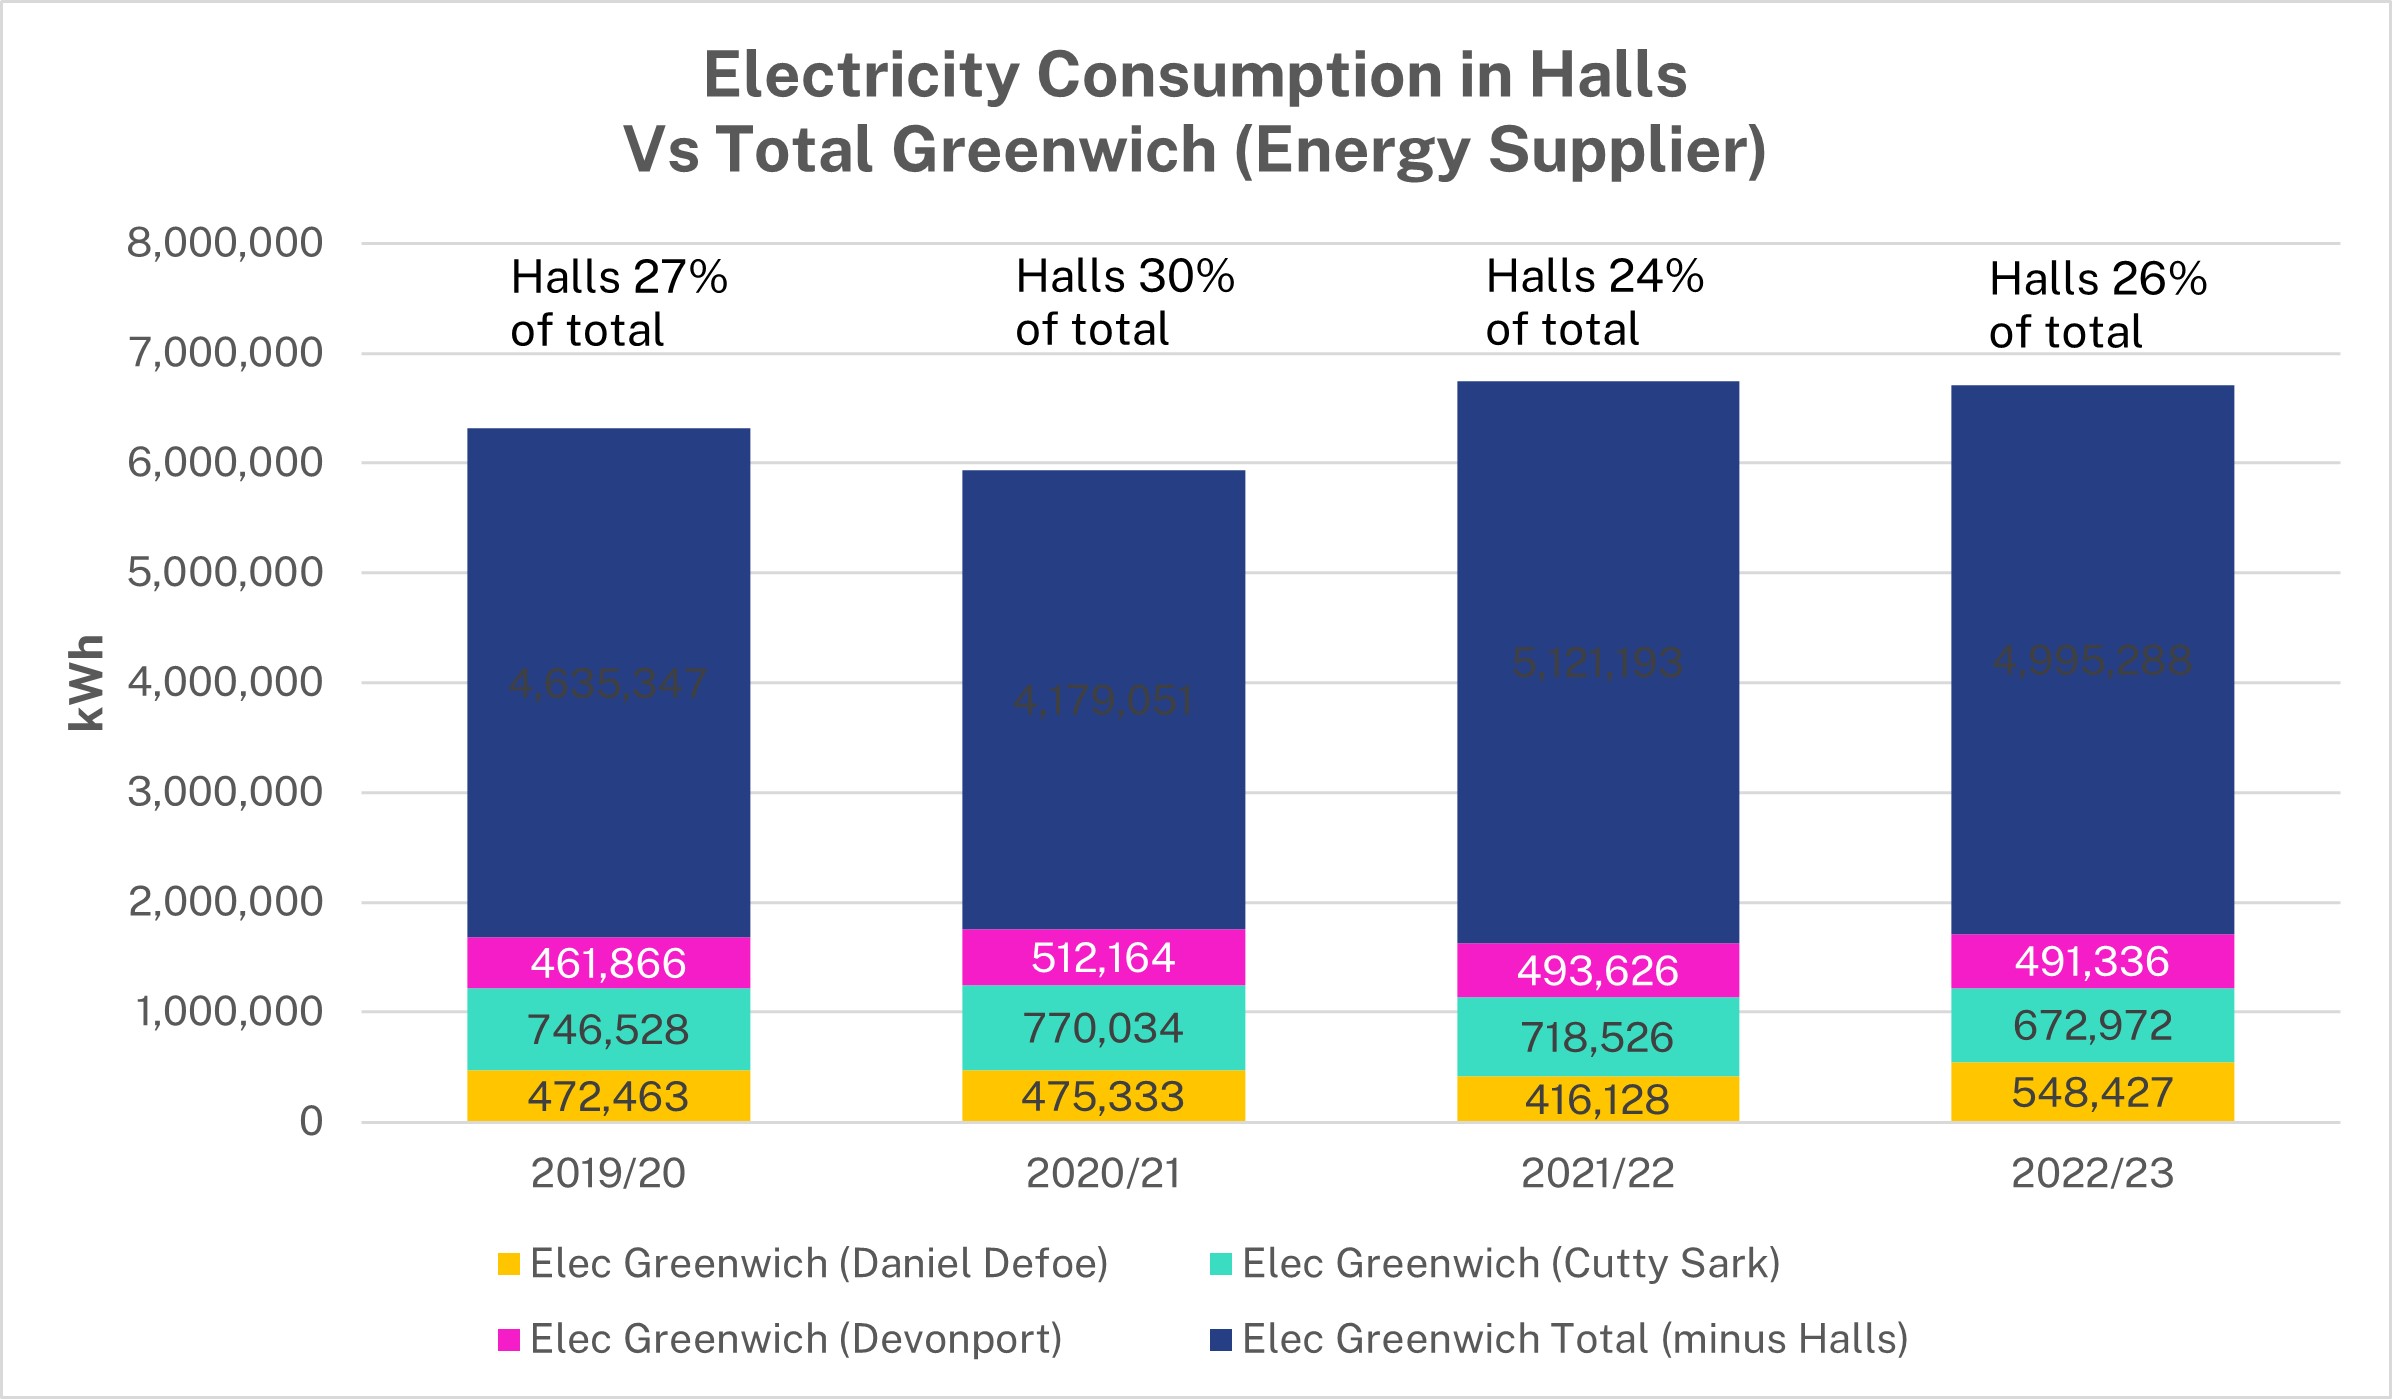 Electricity Consumption of Greenwich Halls